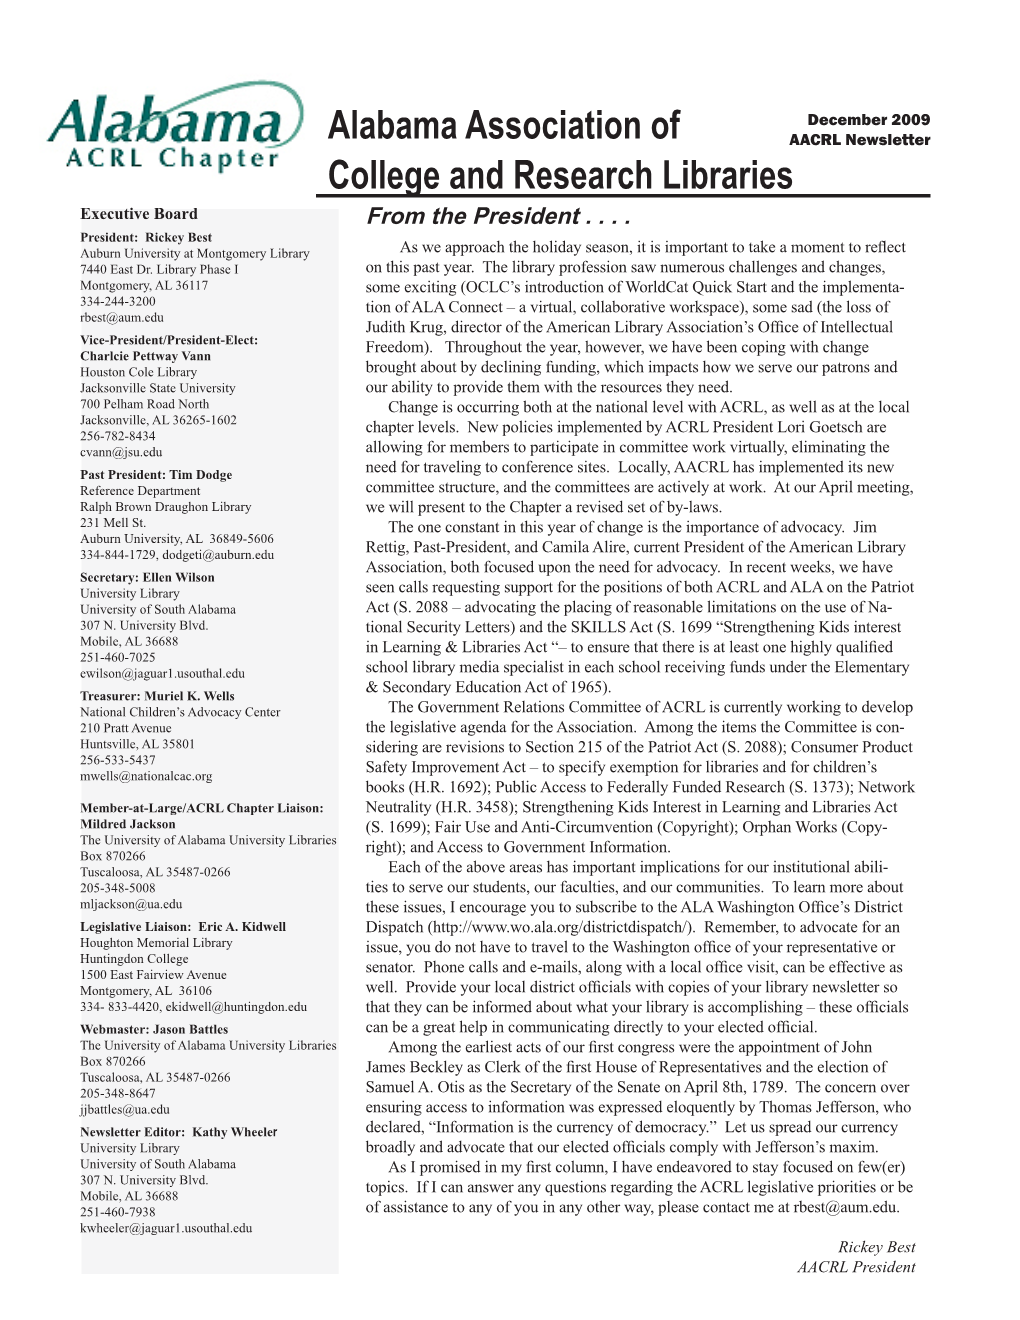 Alabama Association of College and Research Libraries